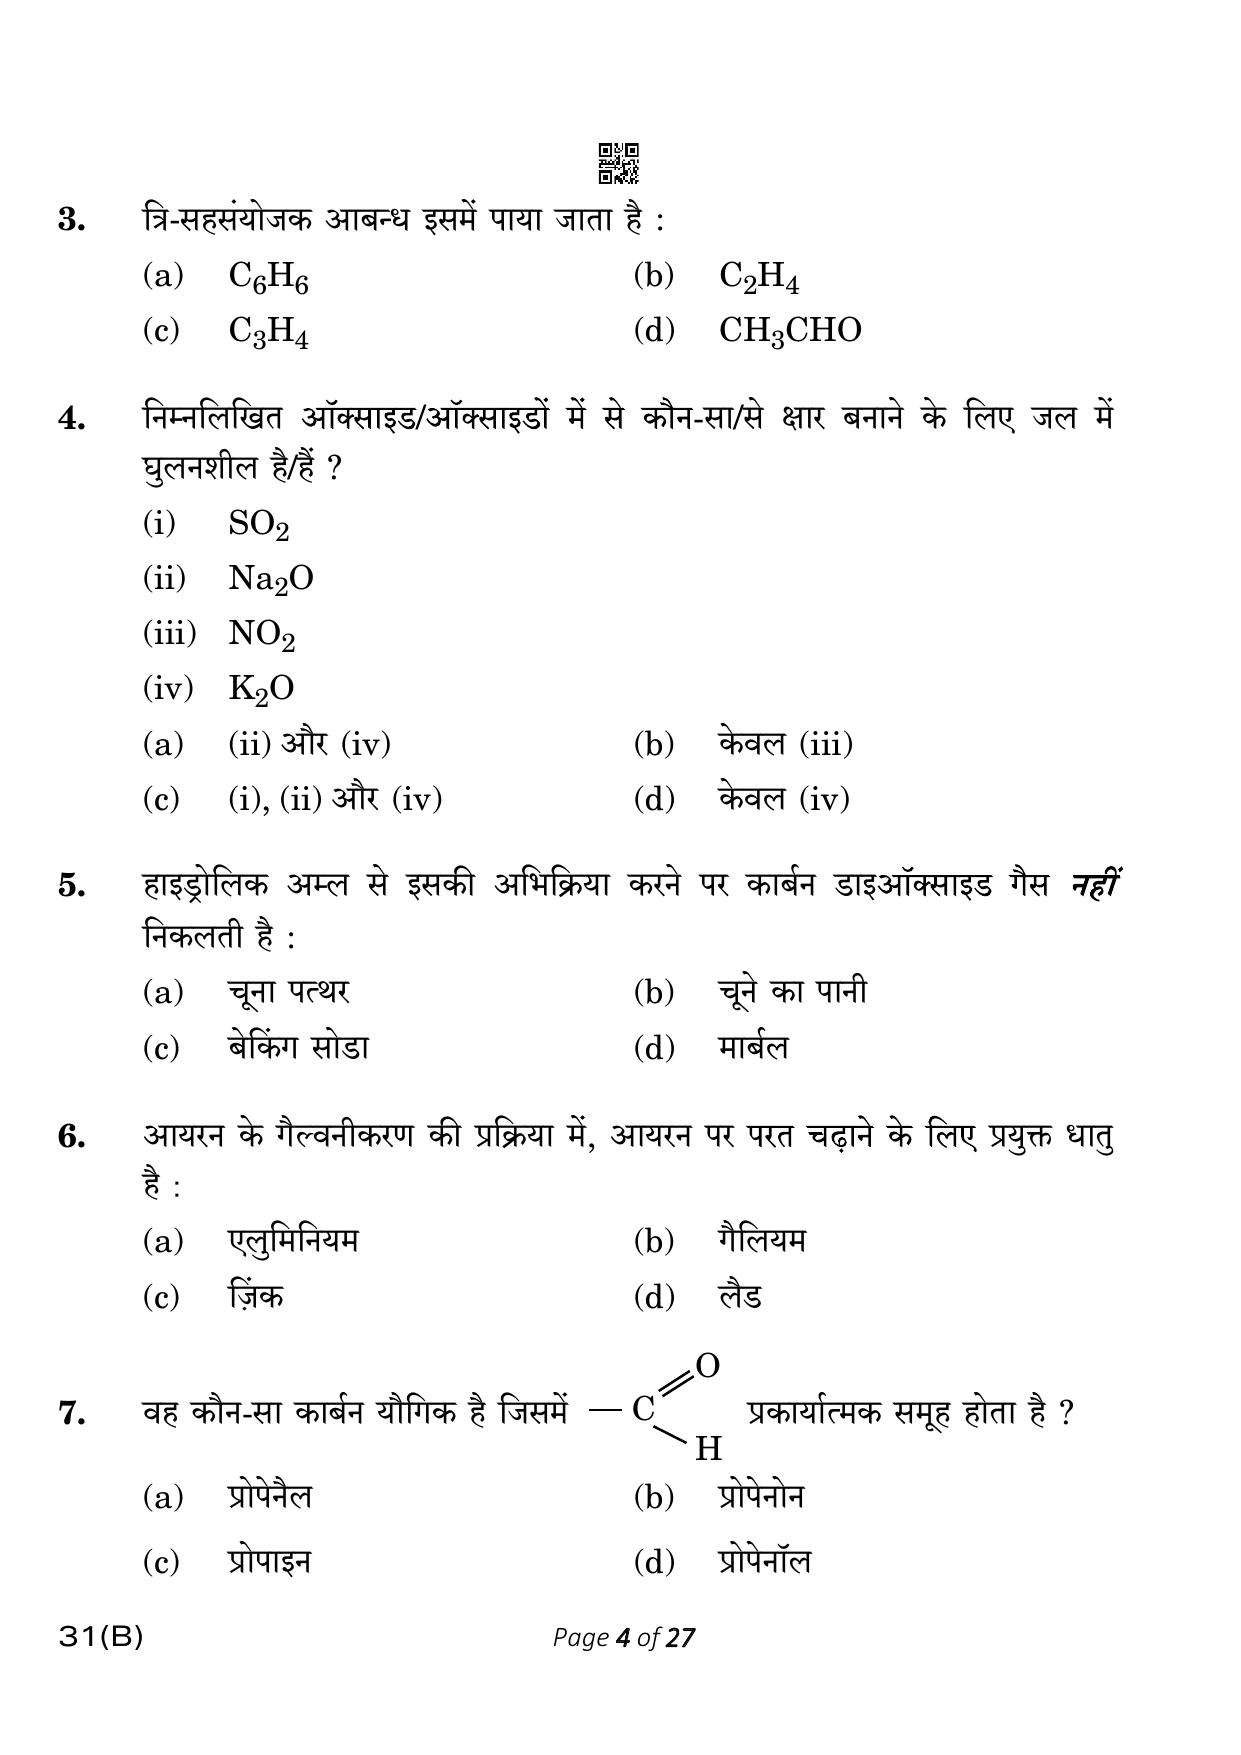 CBSE Class 10 31-B Science 2023 (Compartment) Question Paper - Page 4